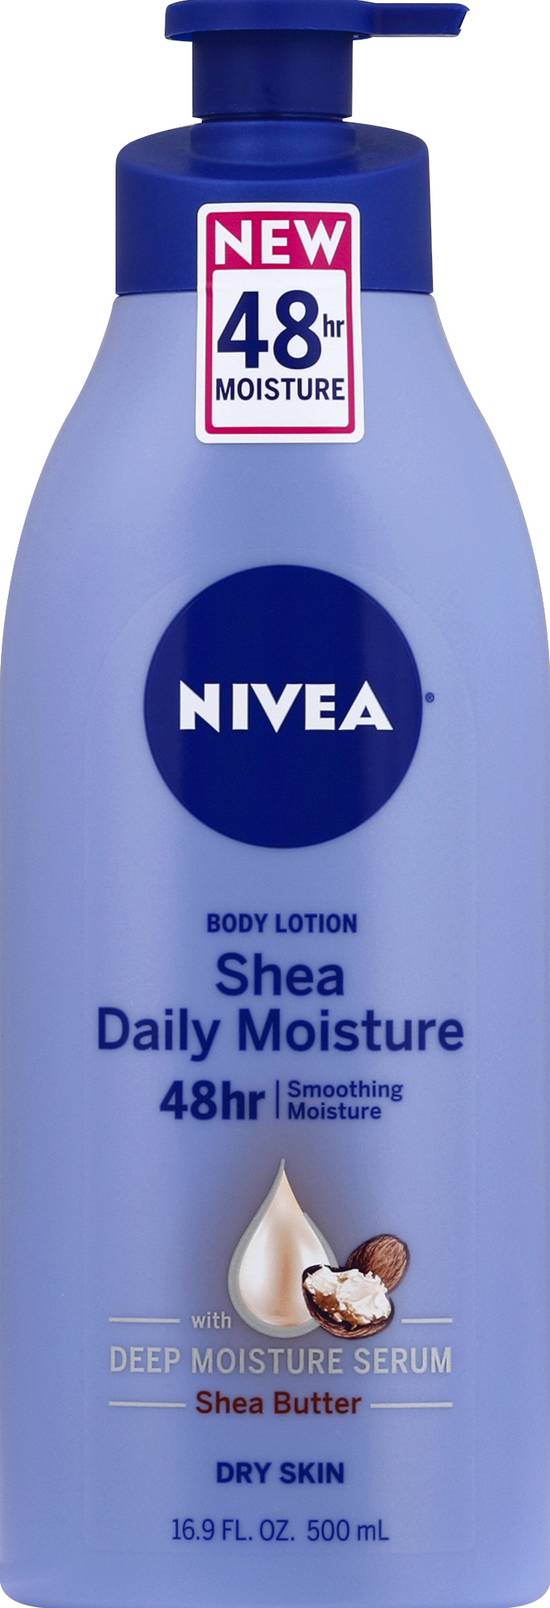 Nivea Shea Butter Smooth Daily Moisture Body Lotion